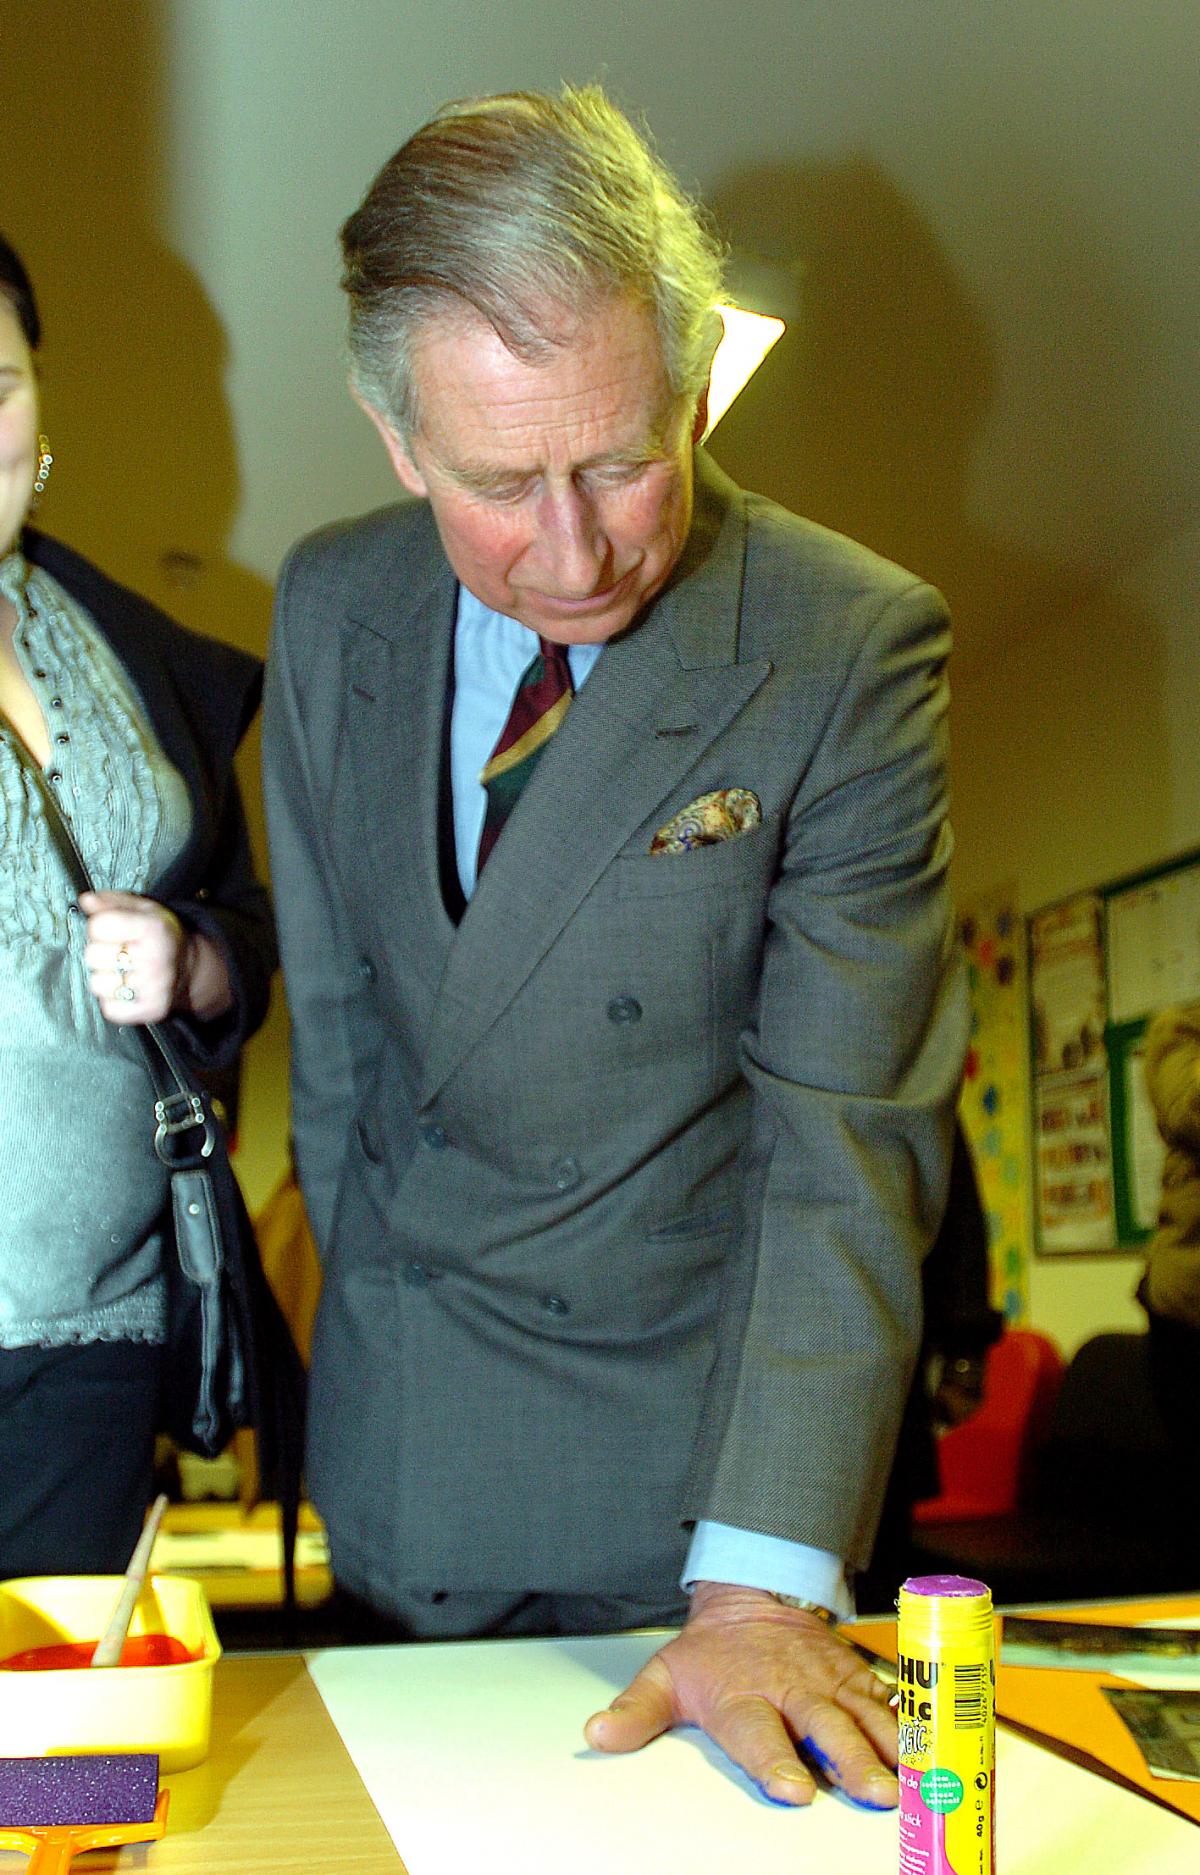 Prince Charles does a hand print for the Cornerstone Centre wall